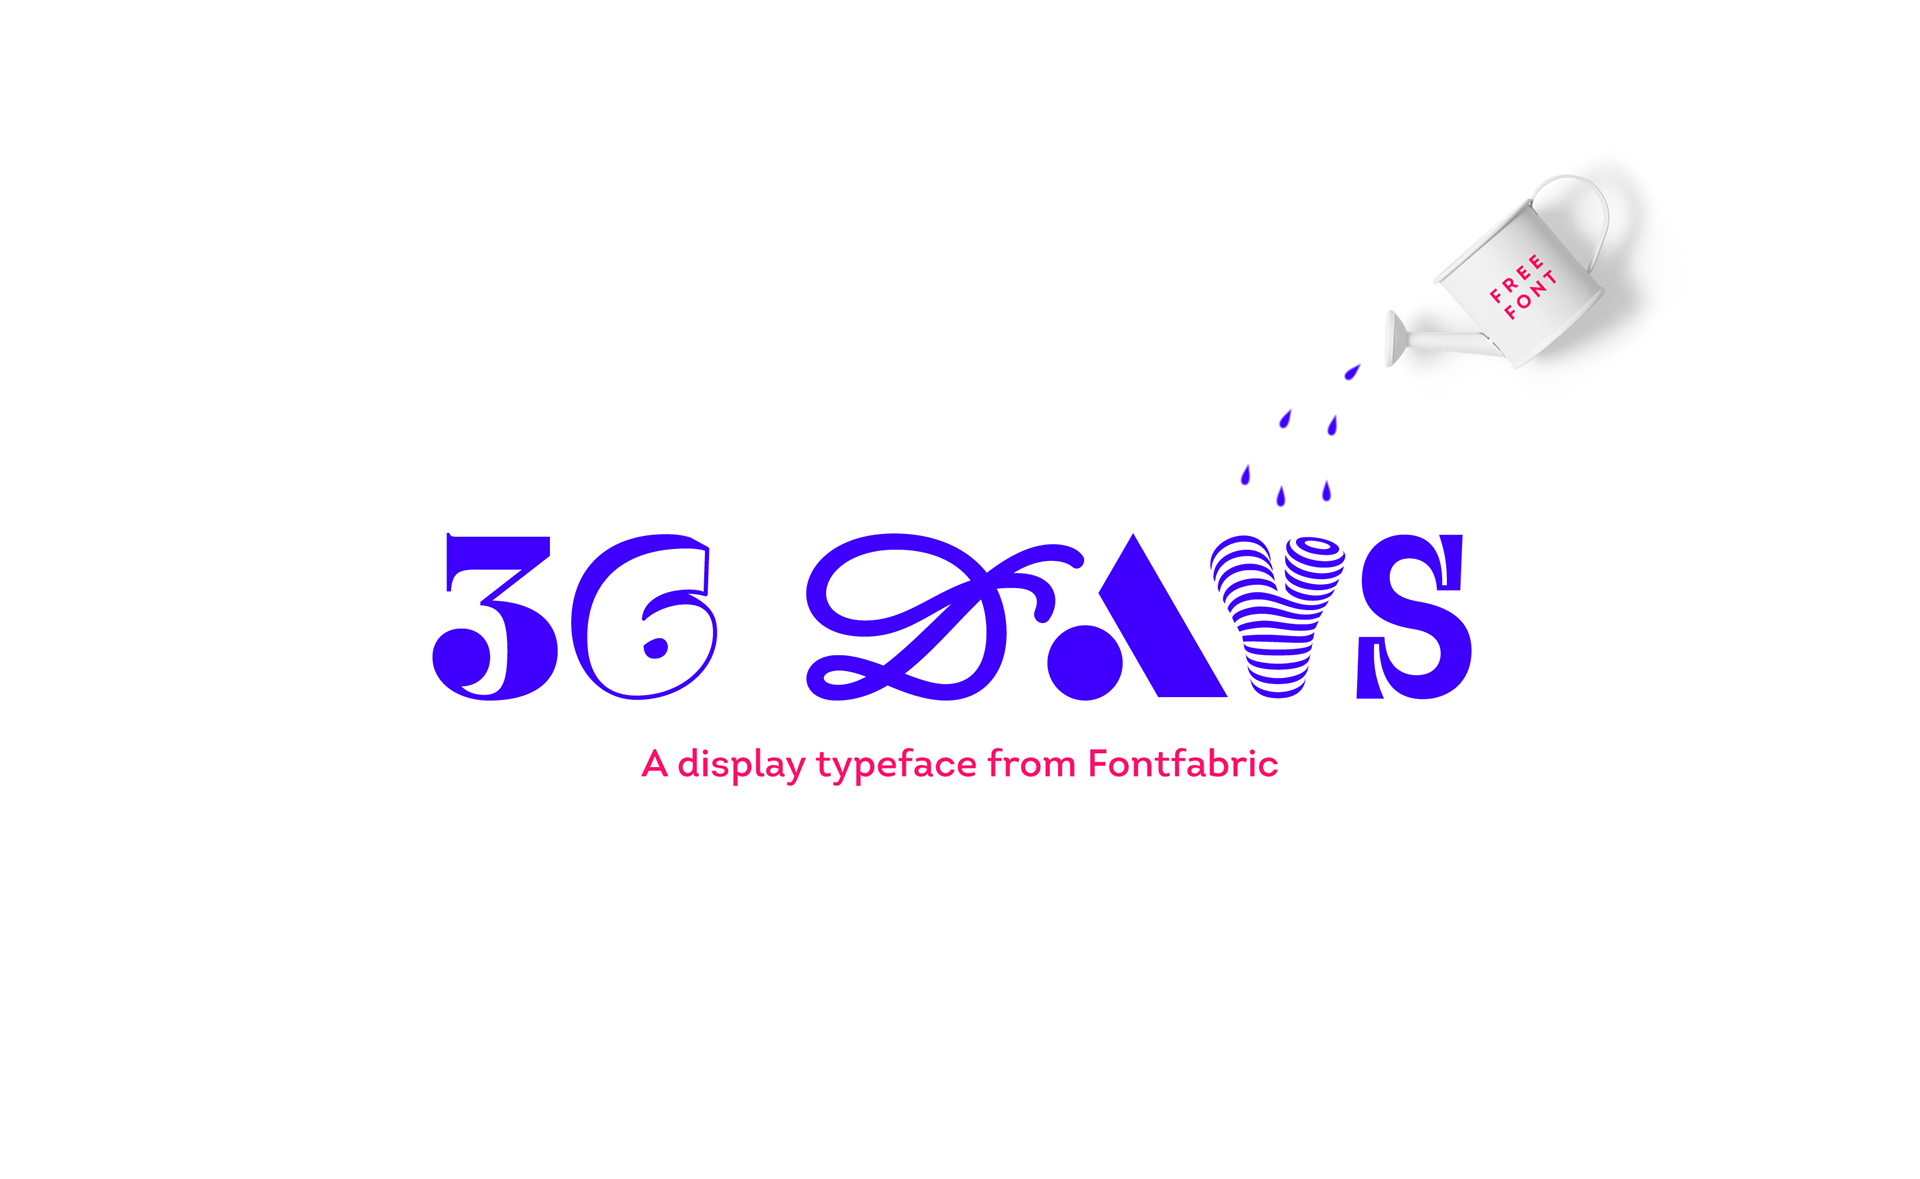 36 Days - the typeface